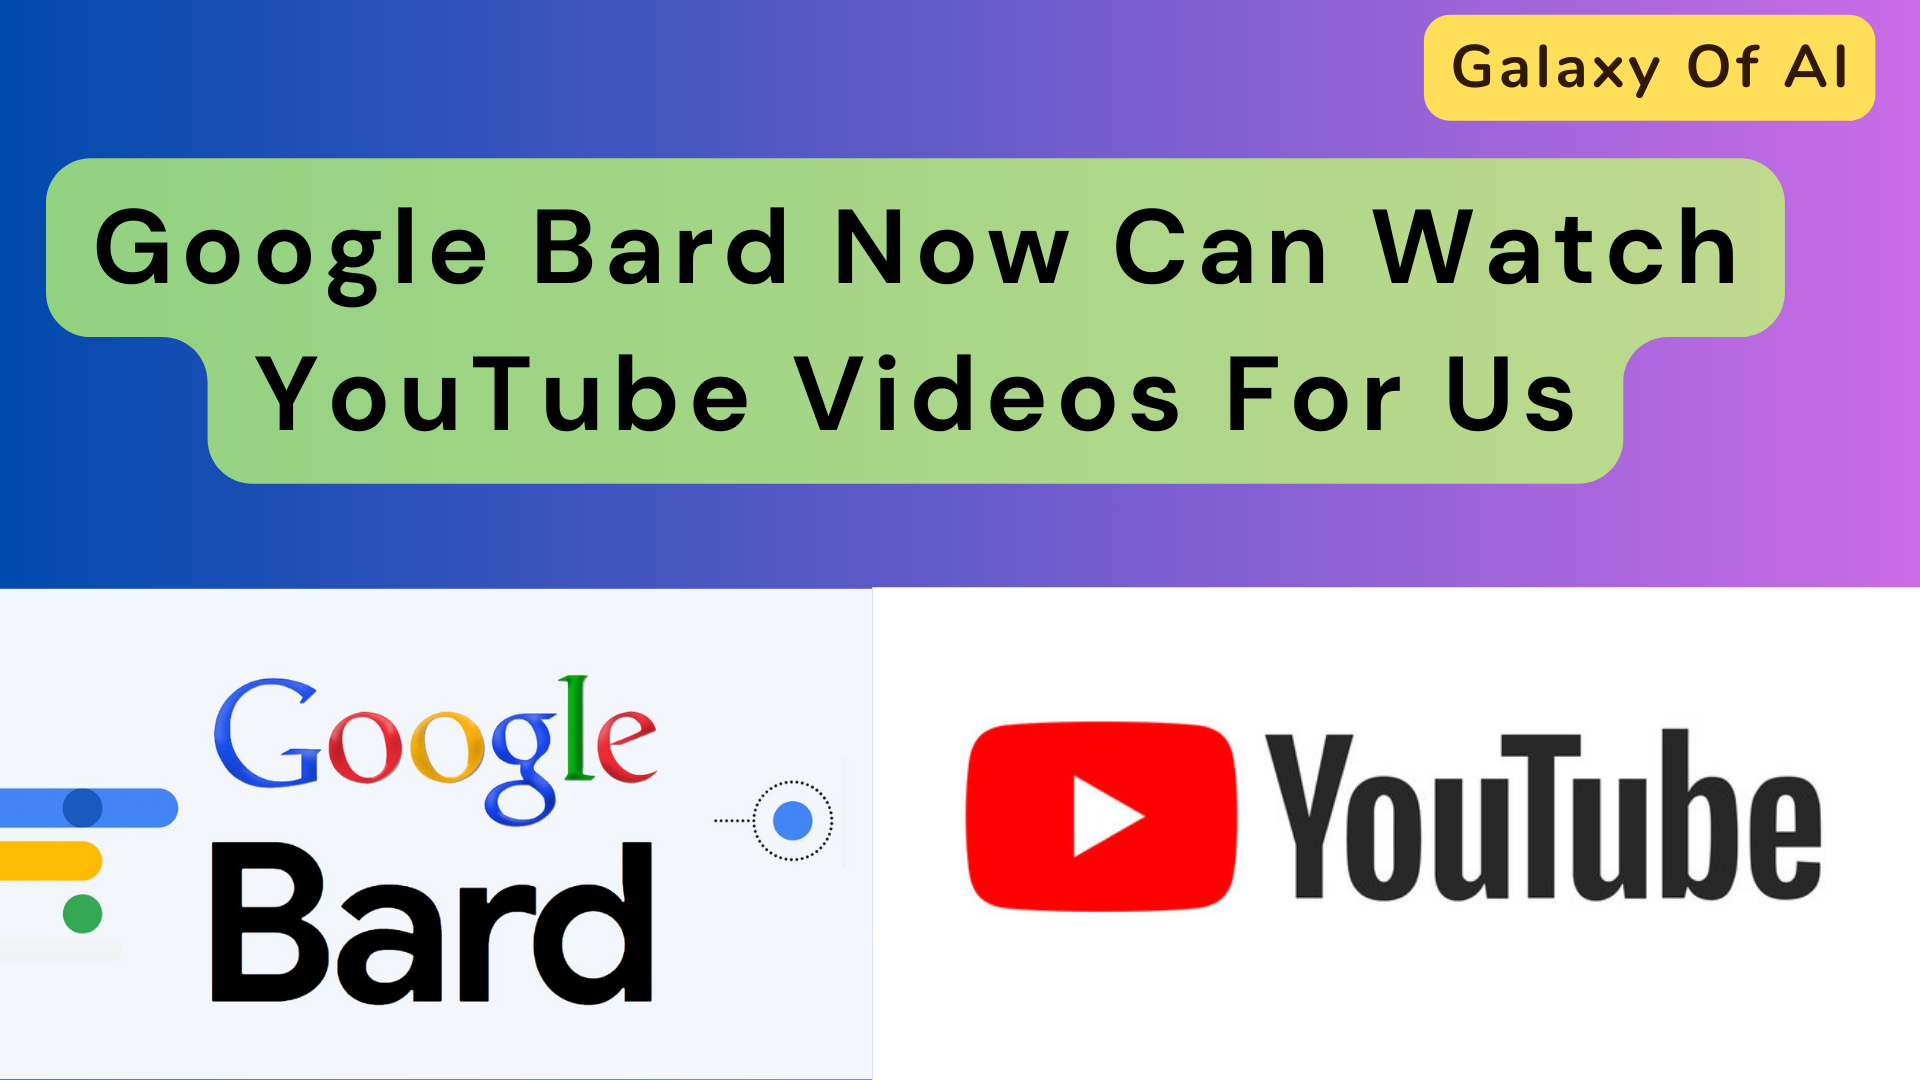 Google Bard Now Can Watch YouTube Videos For Us